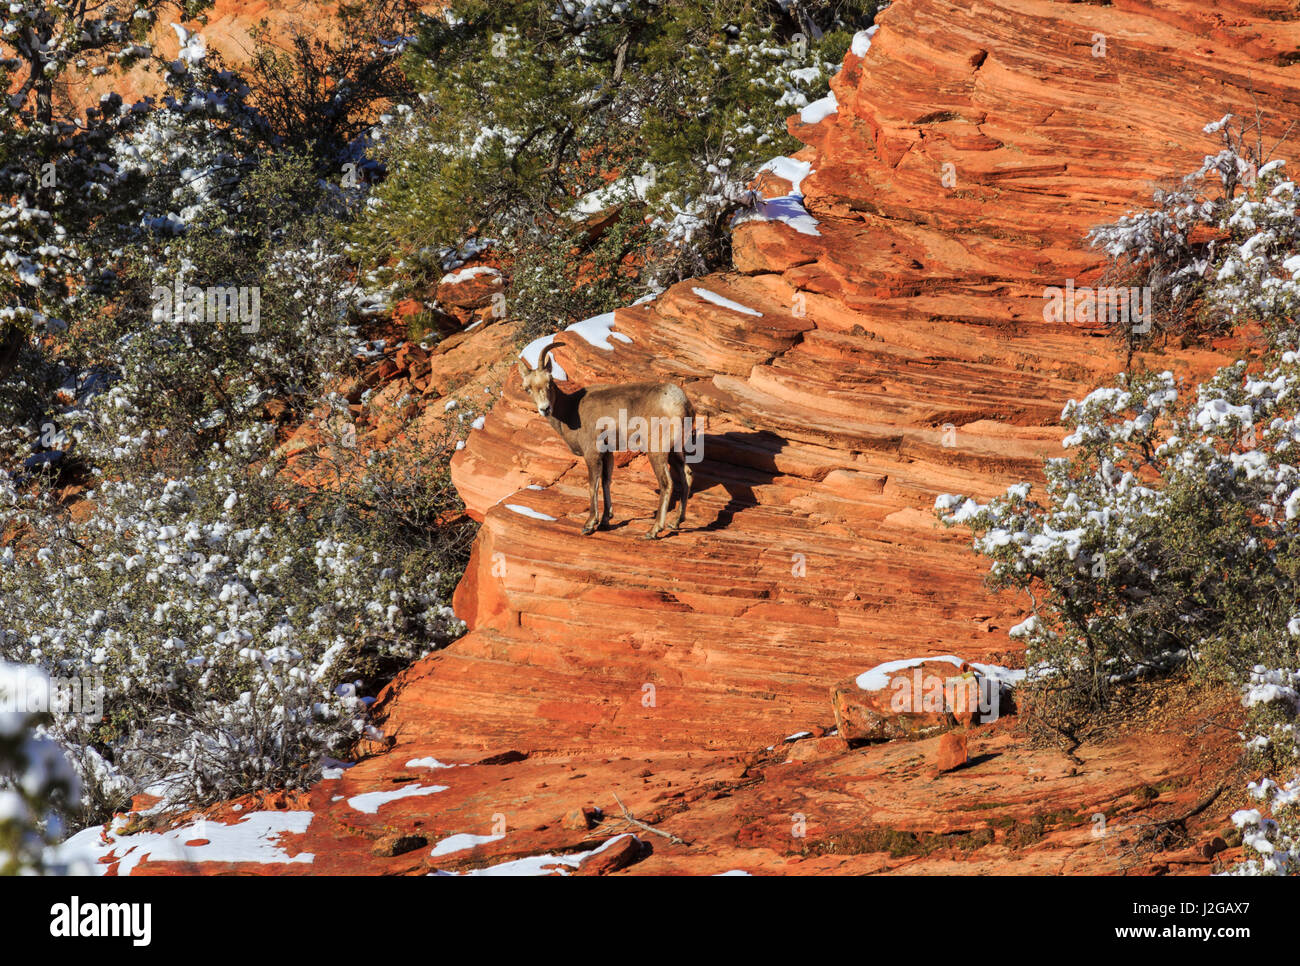 In this shot a desert bighorn sheep stands precariously on a red rock point within viewing distance of the Zion-Mount Carmel Scenic Byway.. Stock Photo